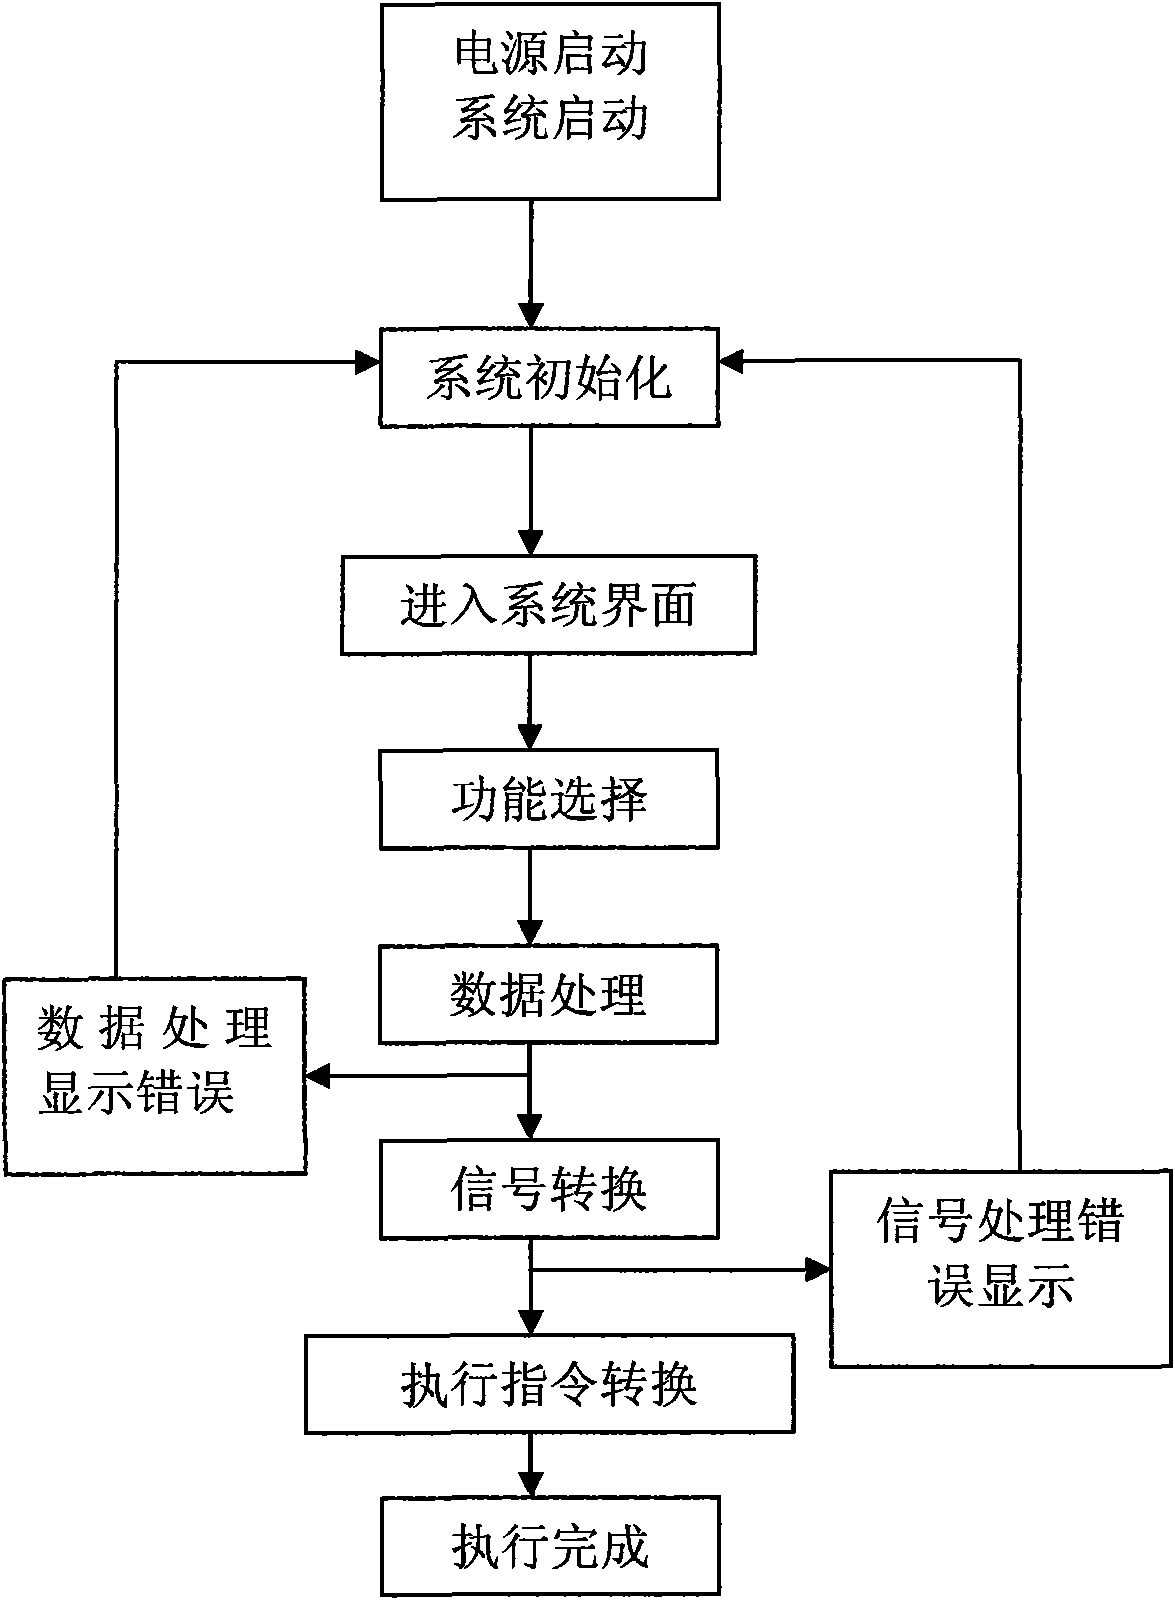 Control method and full electronic servo control system for operating large-scale mechanical arm